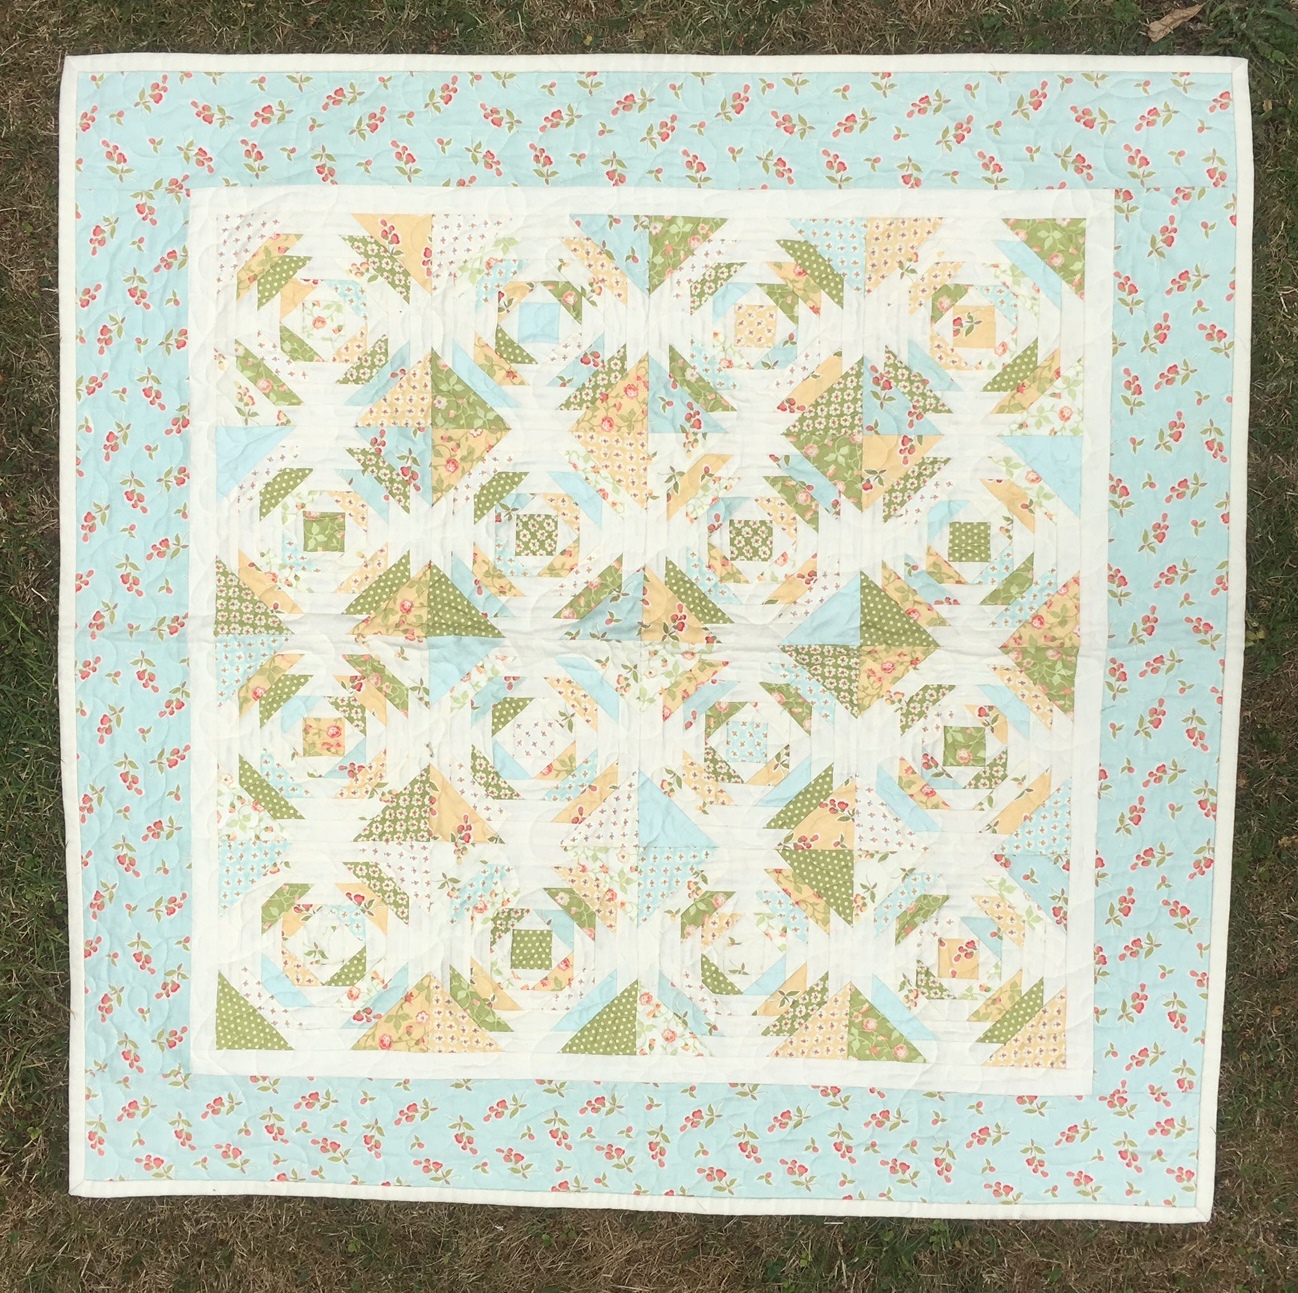 Janet quilt 6 cropped.jpg